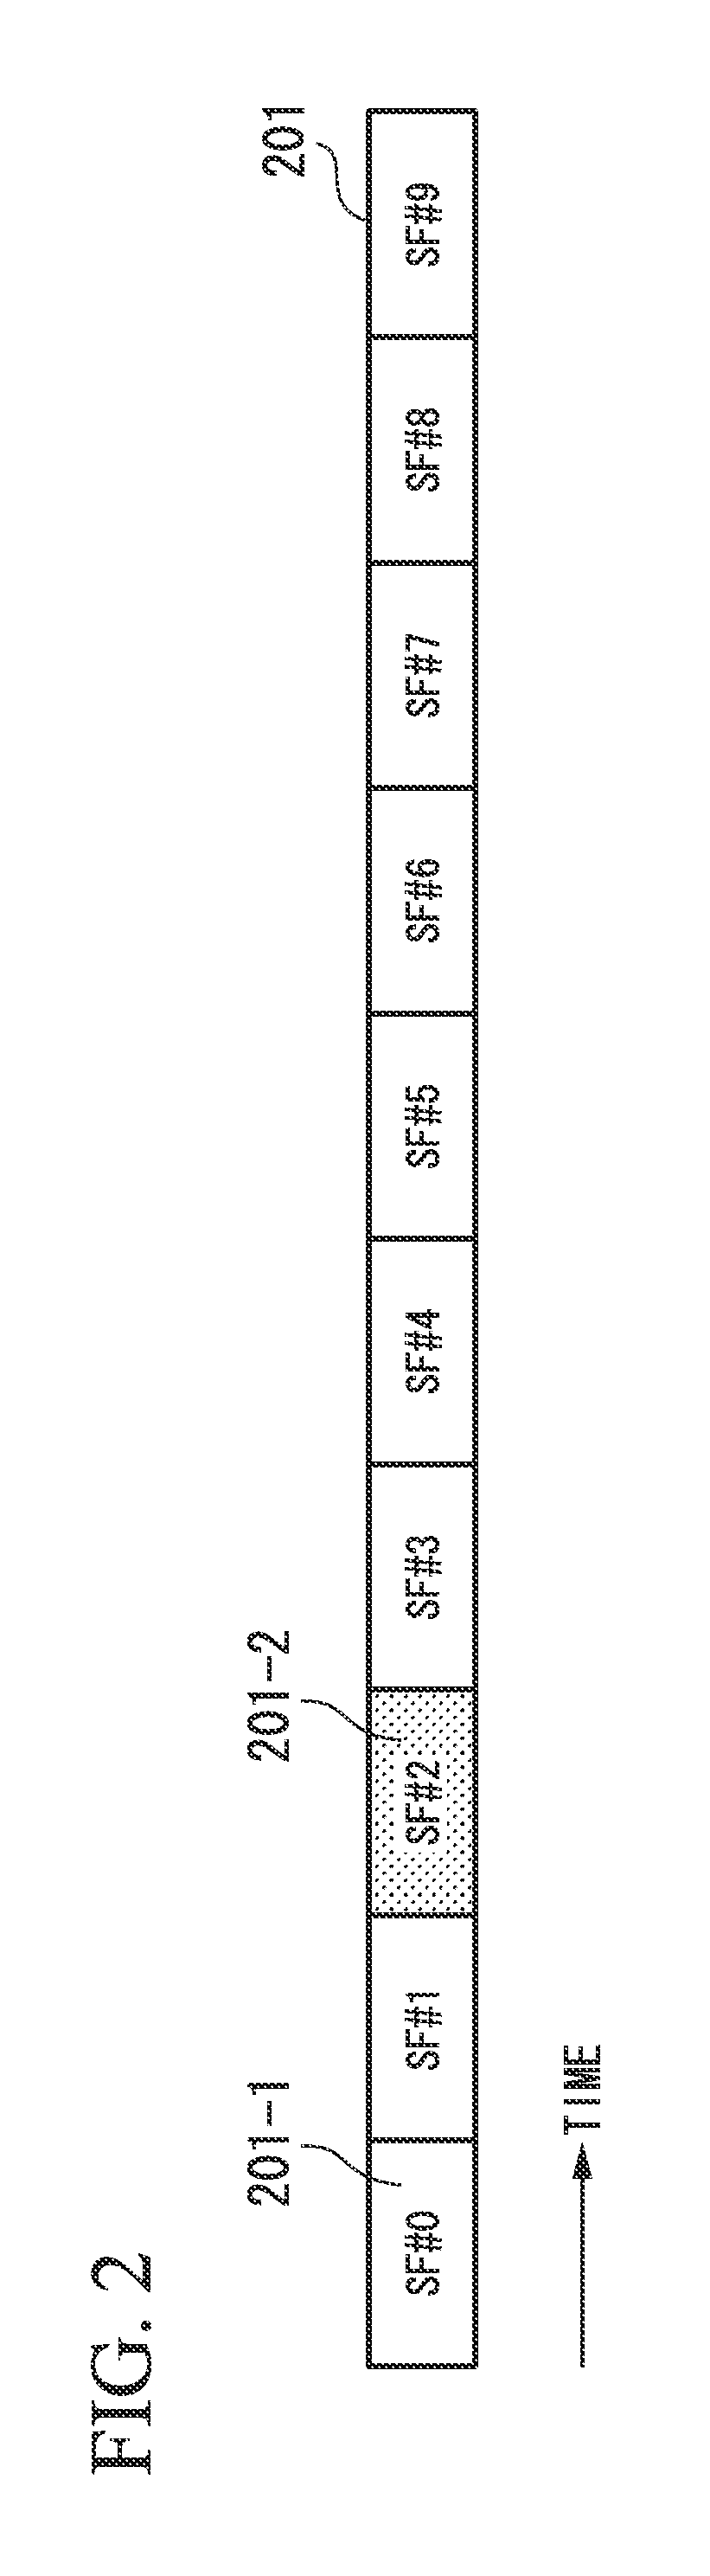 Transmission device, receiving device, communication system, and communication method